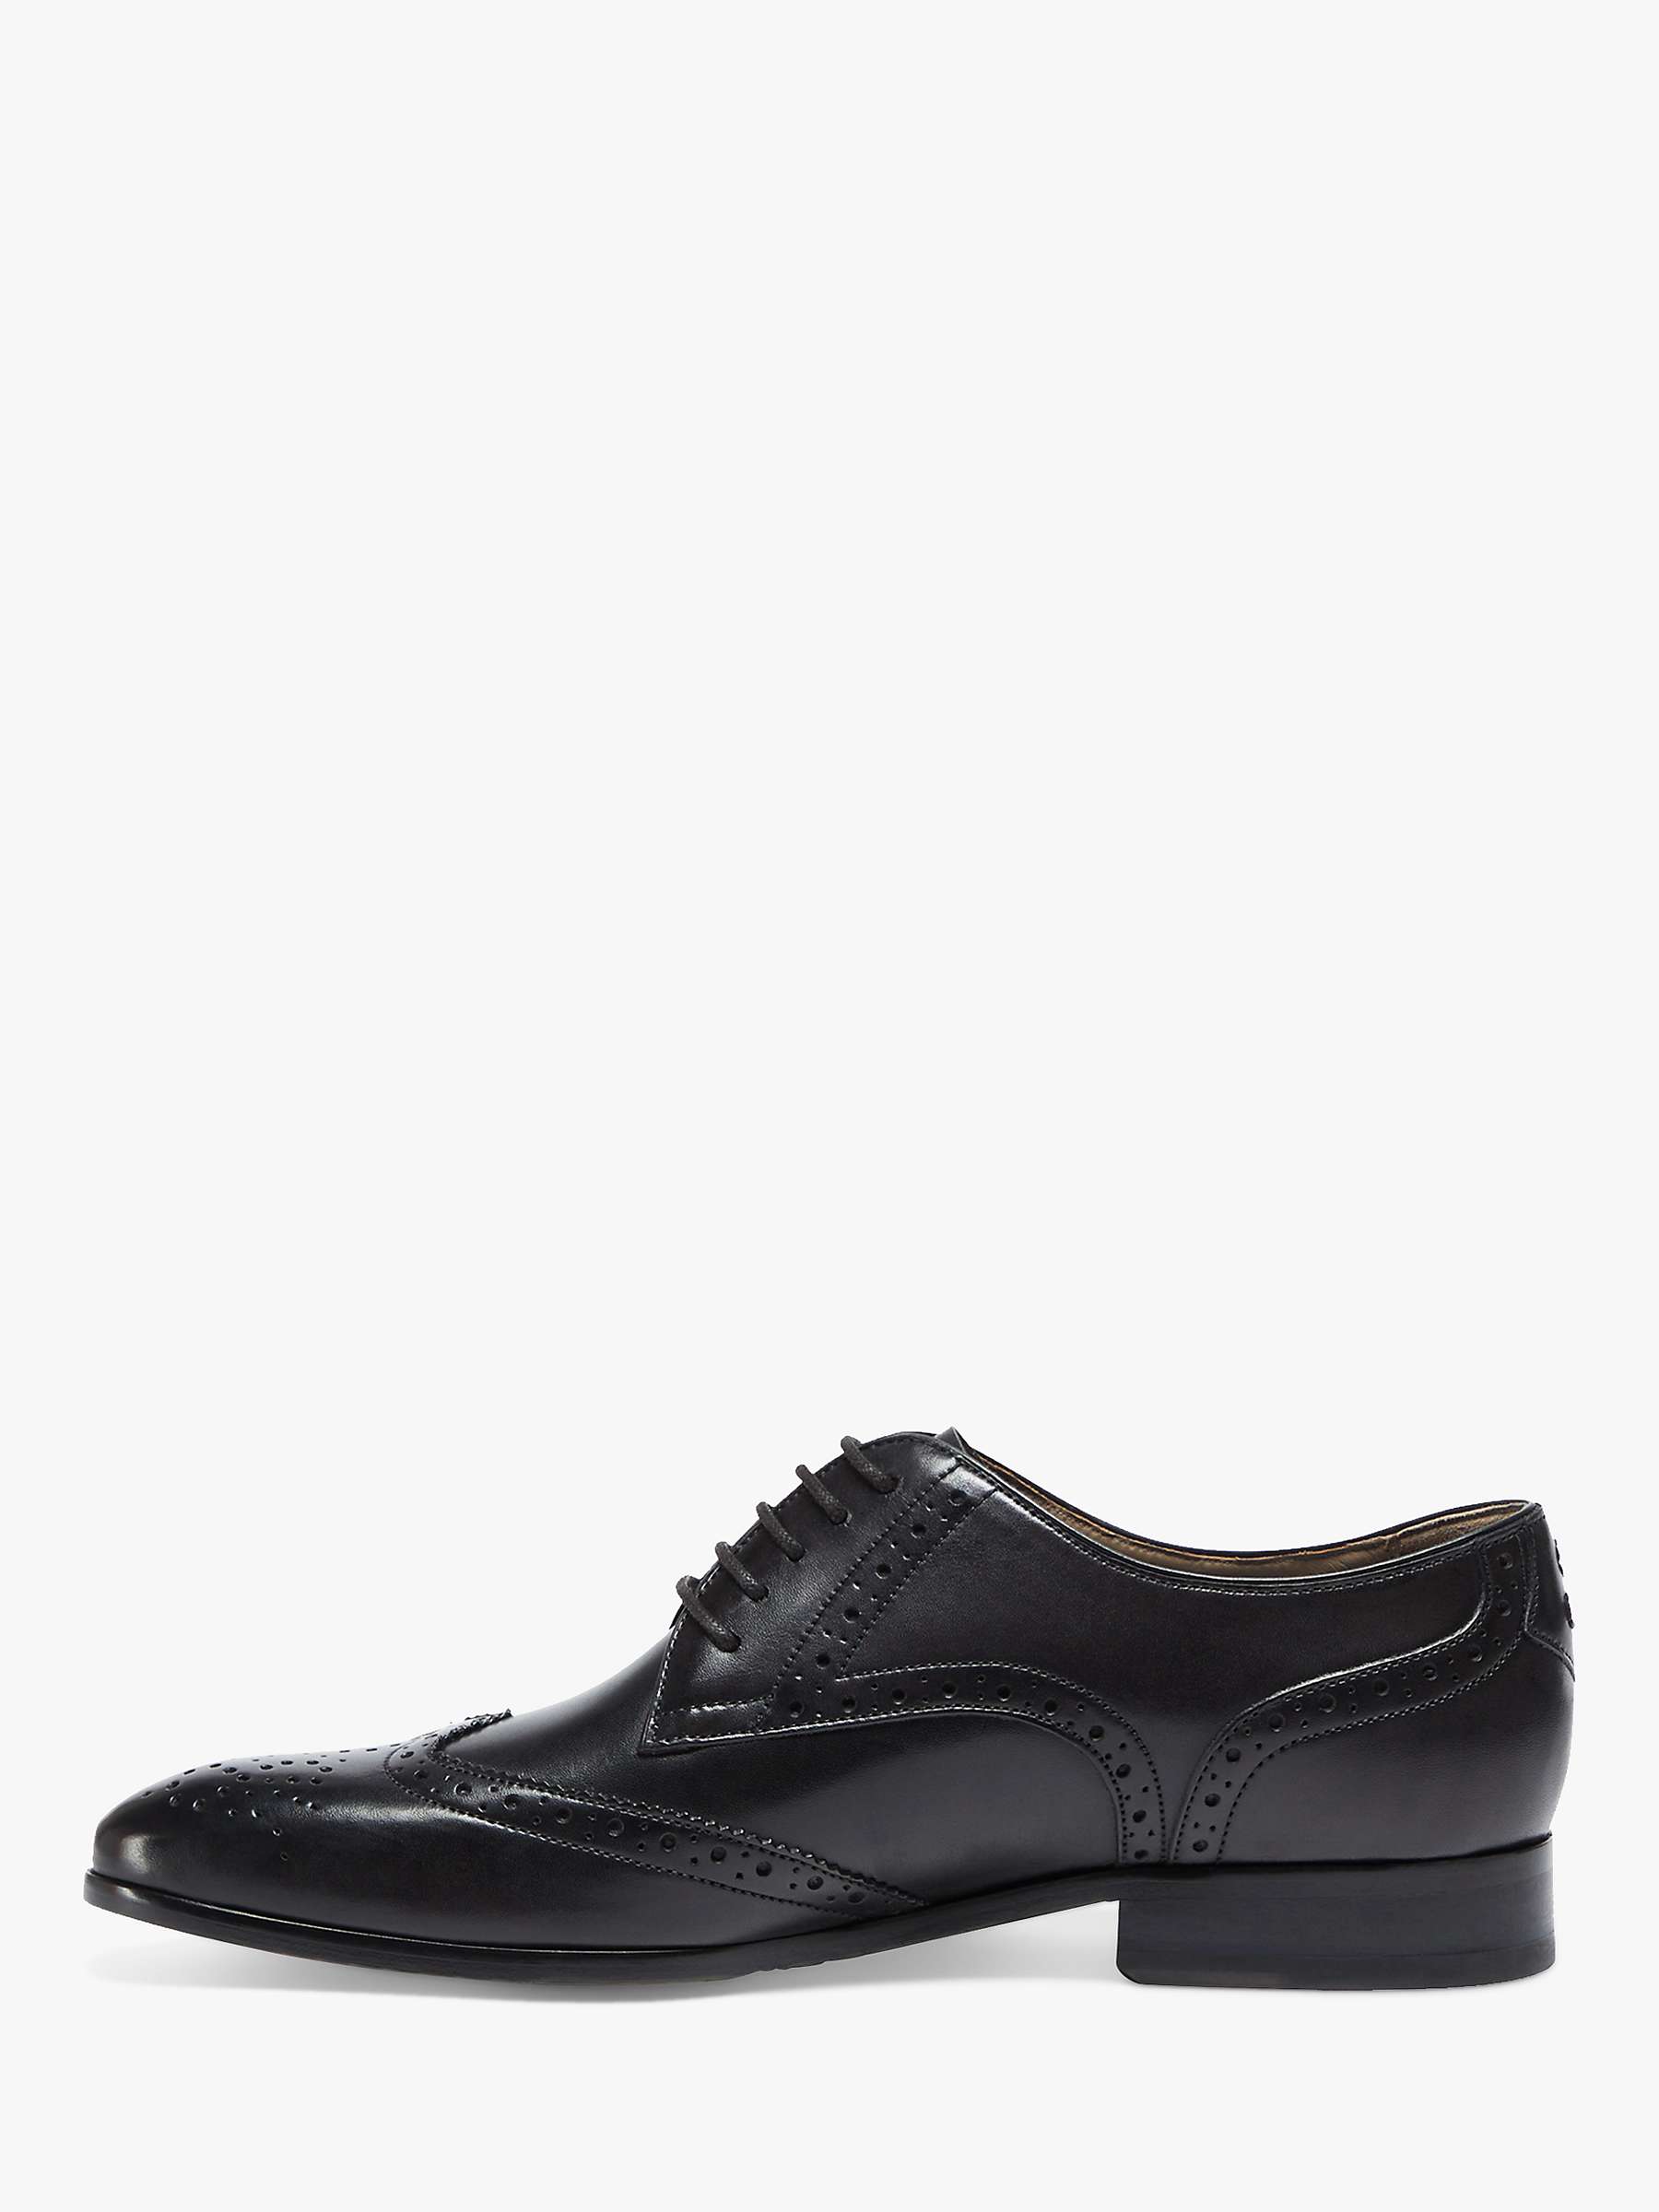 Buy Oliver Sweeney Fressingfield Derby Brogue Shoes, Black Online at johnlewis.com